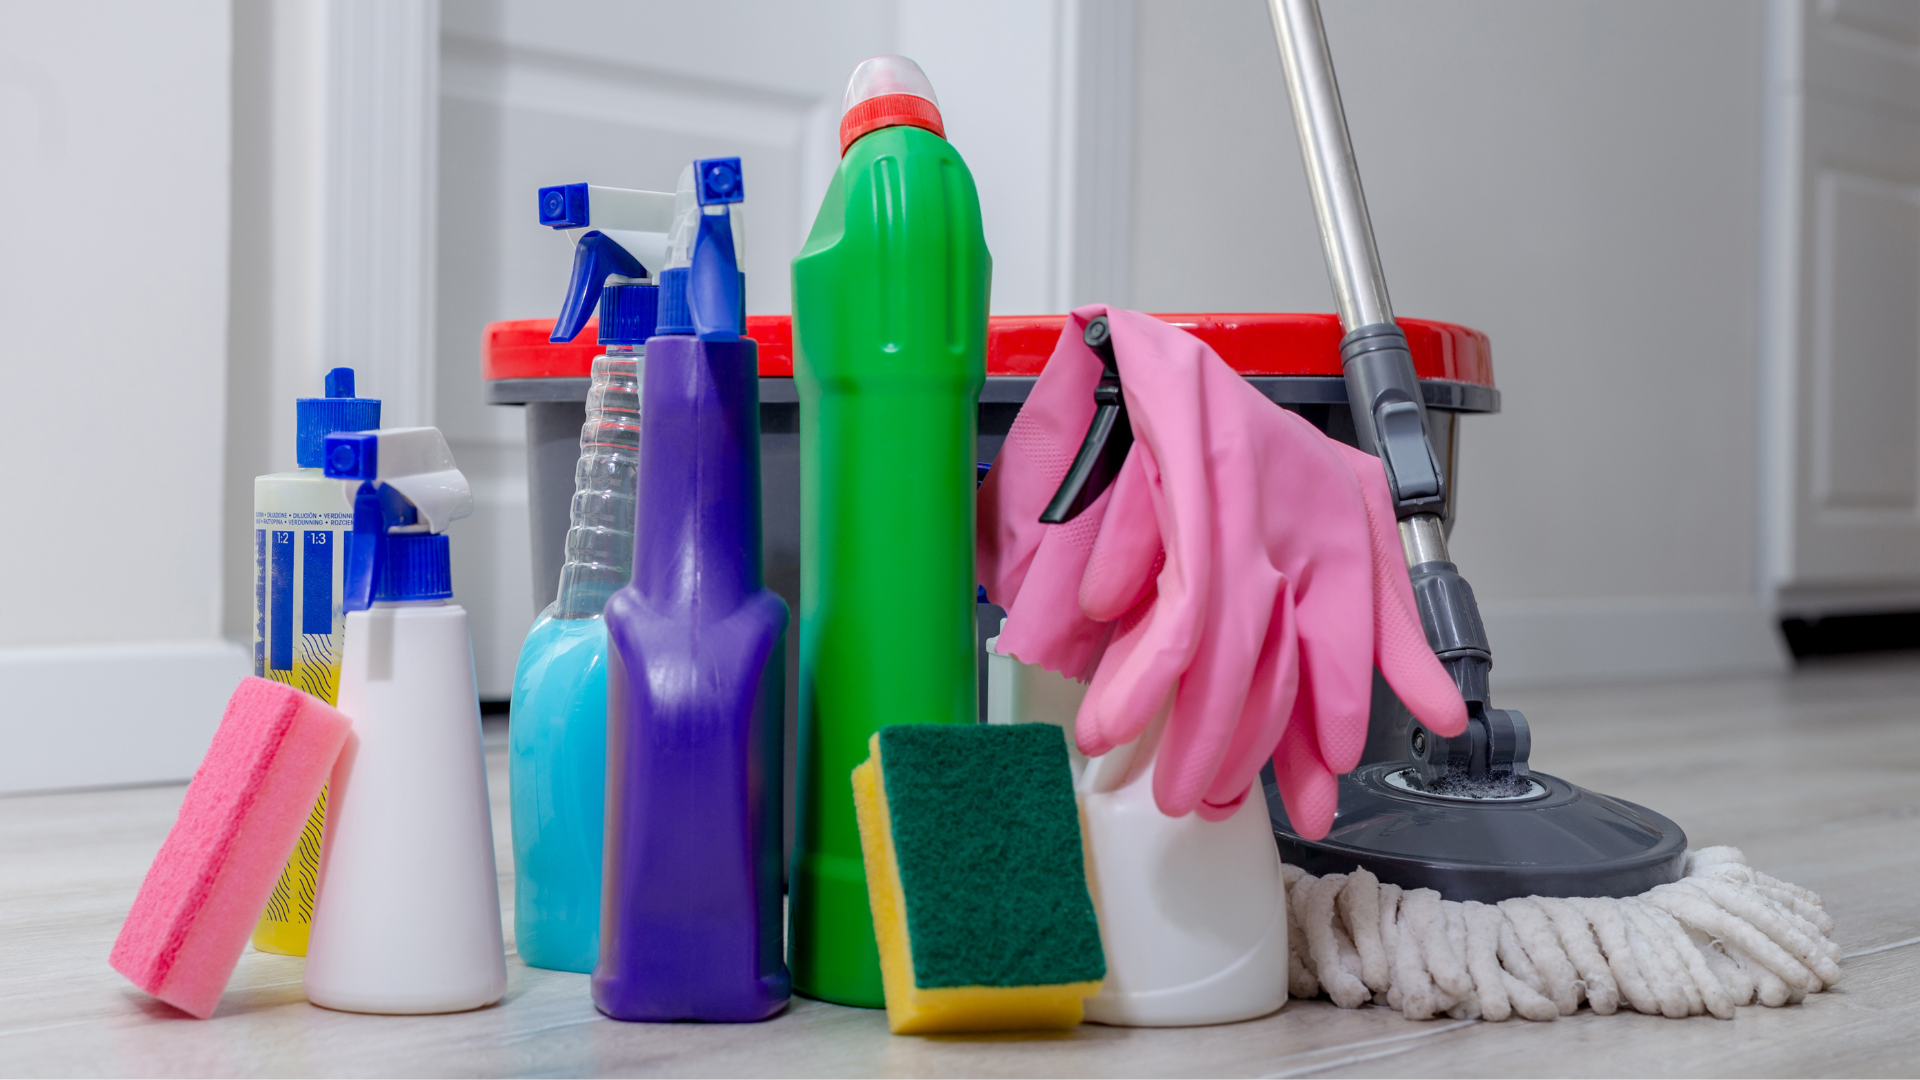 A selection of cleaning products